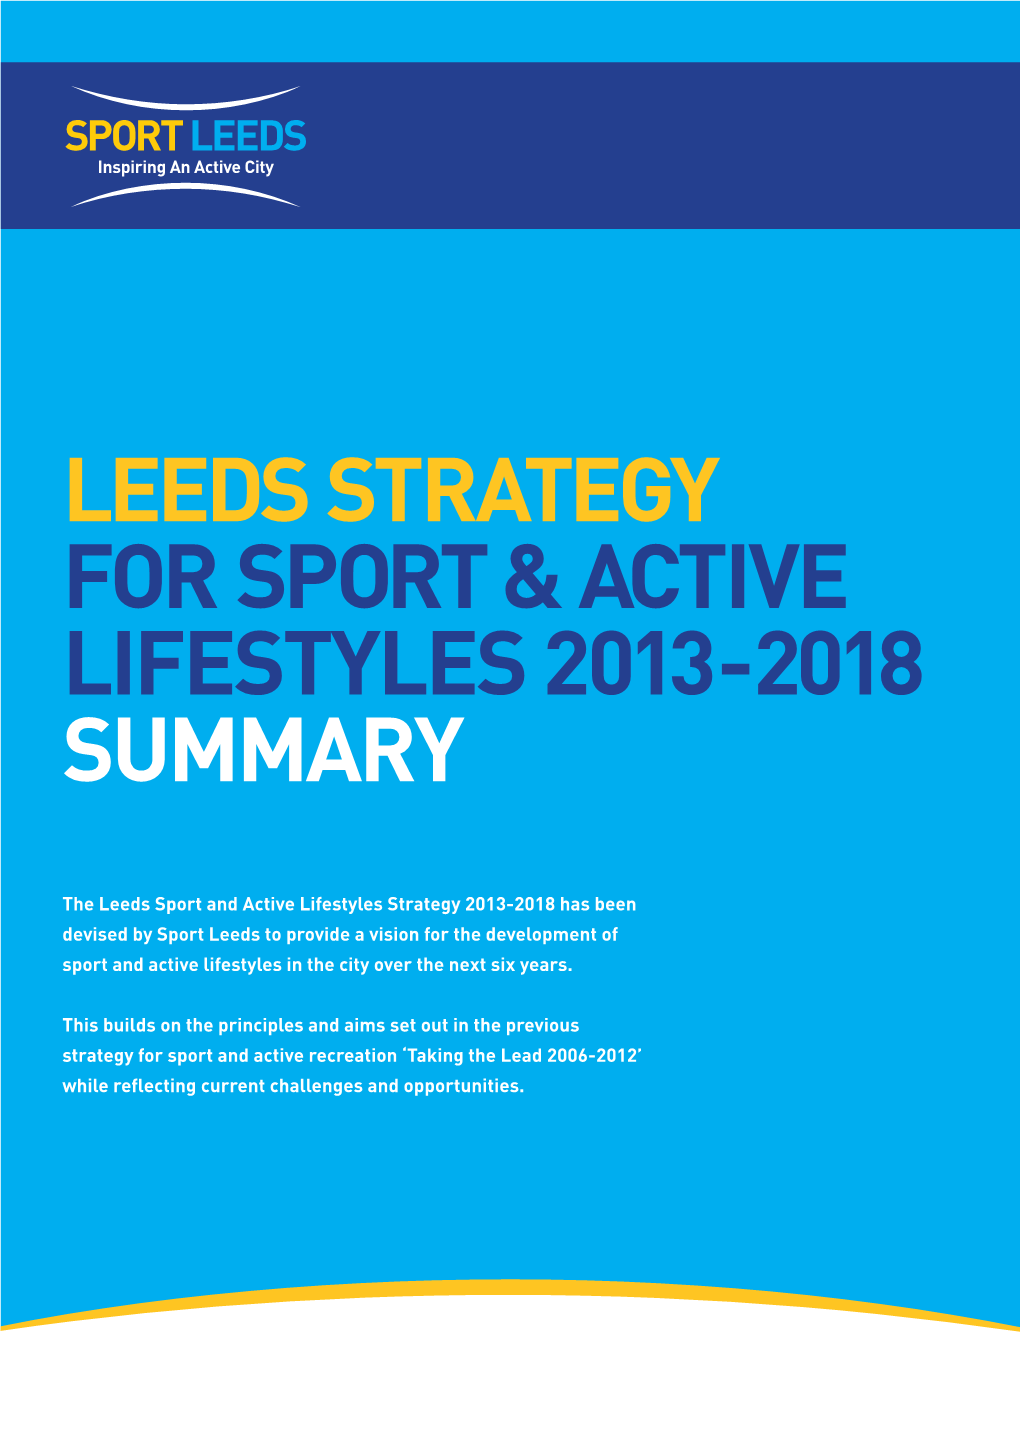 Leeds Strategy for Sport & Active Lifestyles 2013-2018 Summary